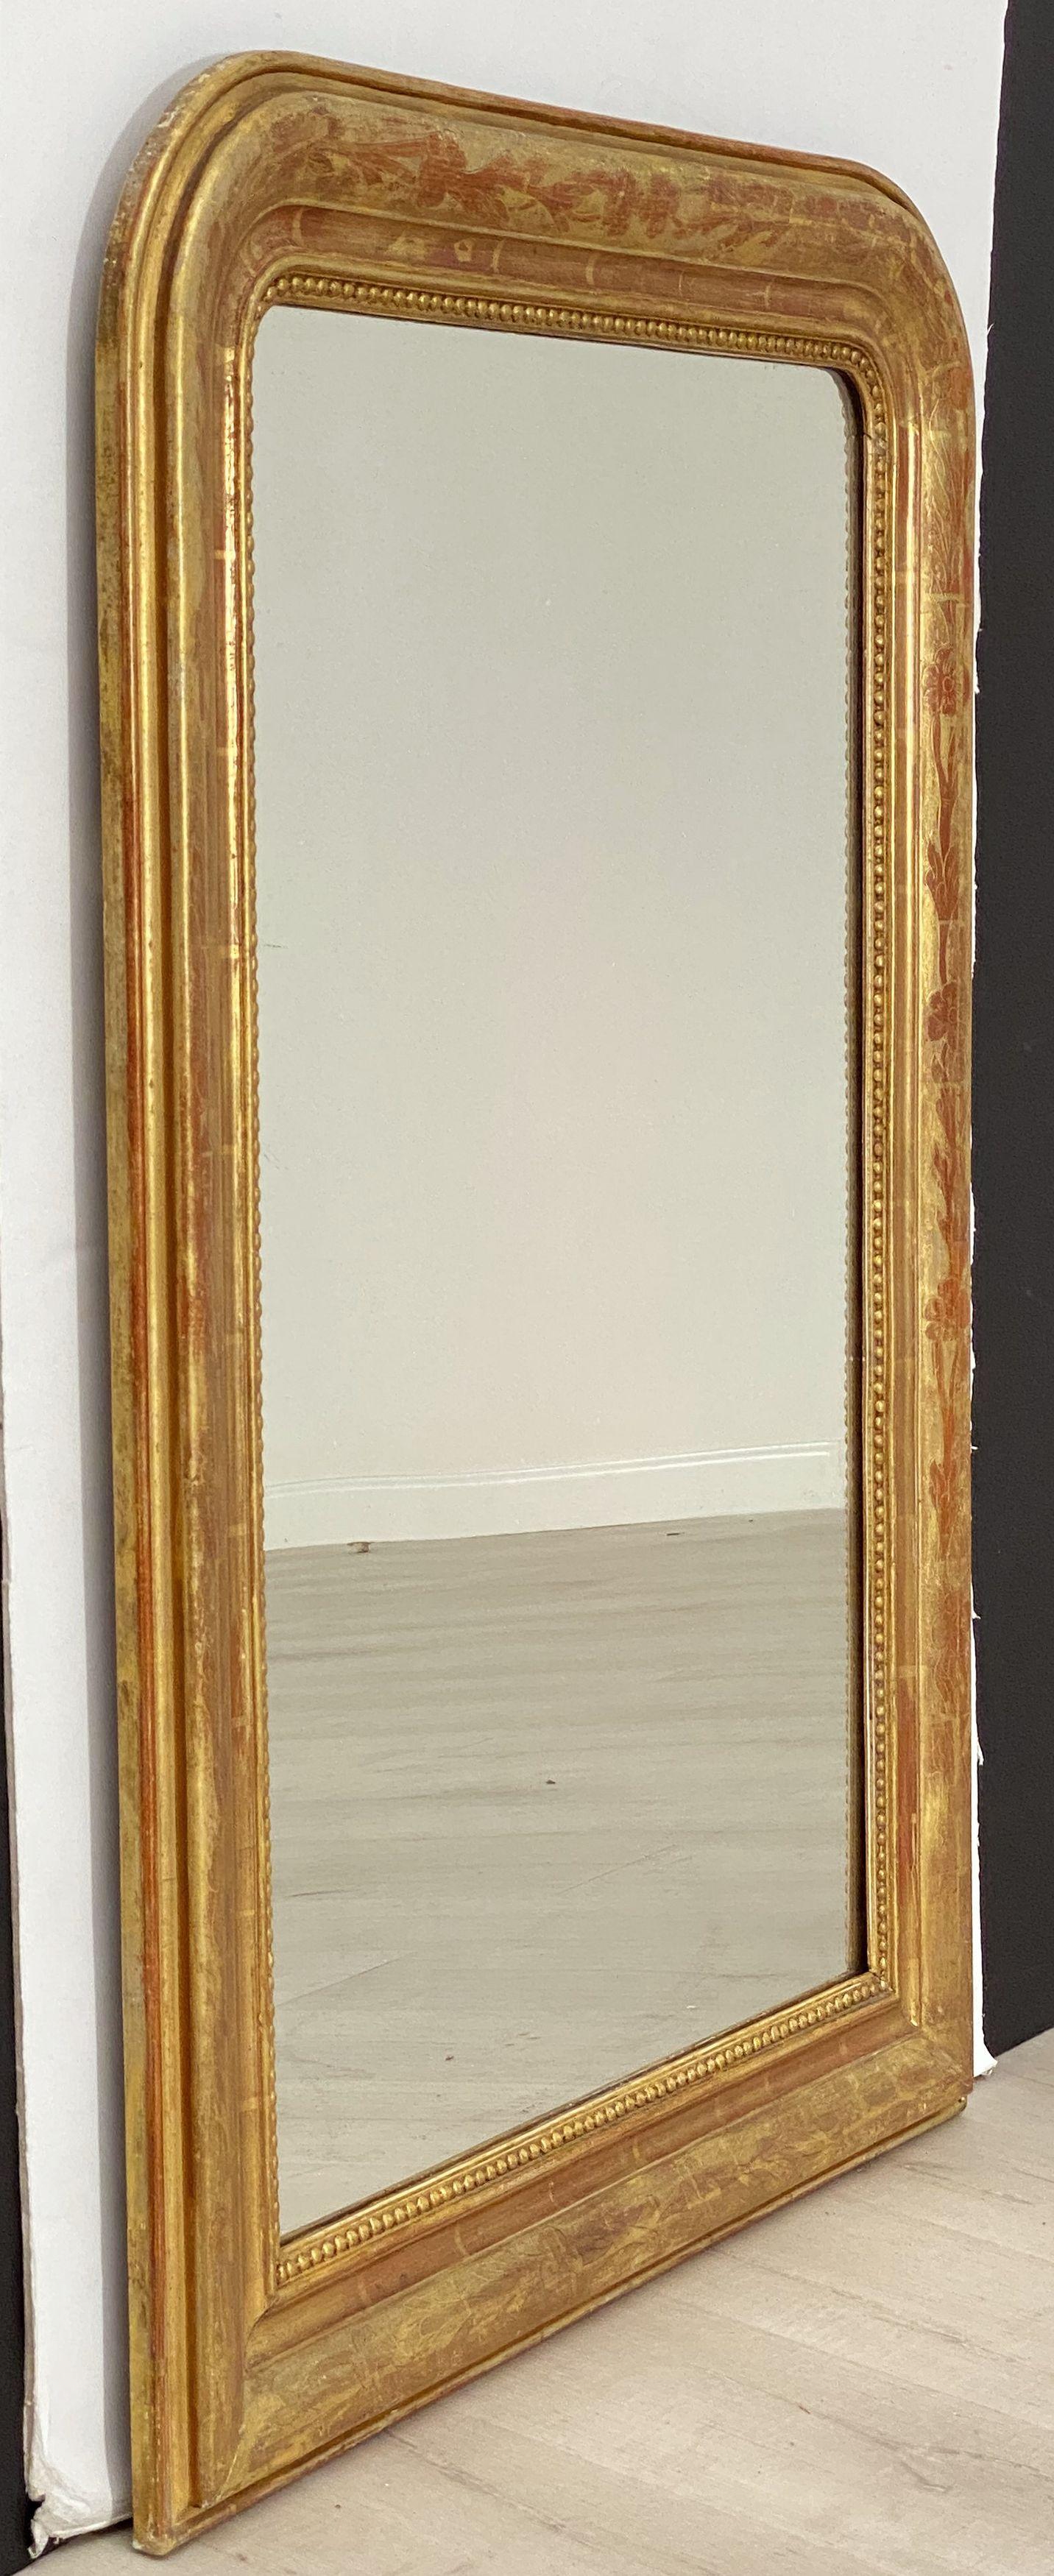 A handsome large Louis Philippe gilt wall mirror from France, featuring a lovely moulded surround and an etched foliate design showing through gold-leaf.

Dimensions: H 38 3/4 inches x W 28 inches

Other sizes available in this style.